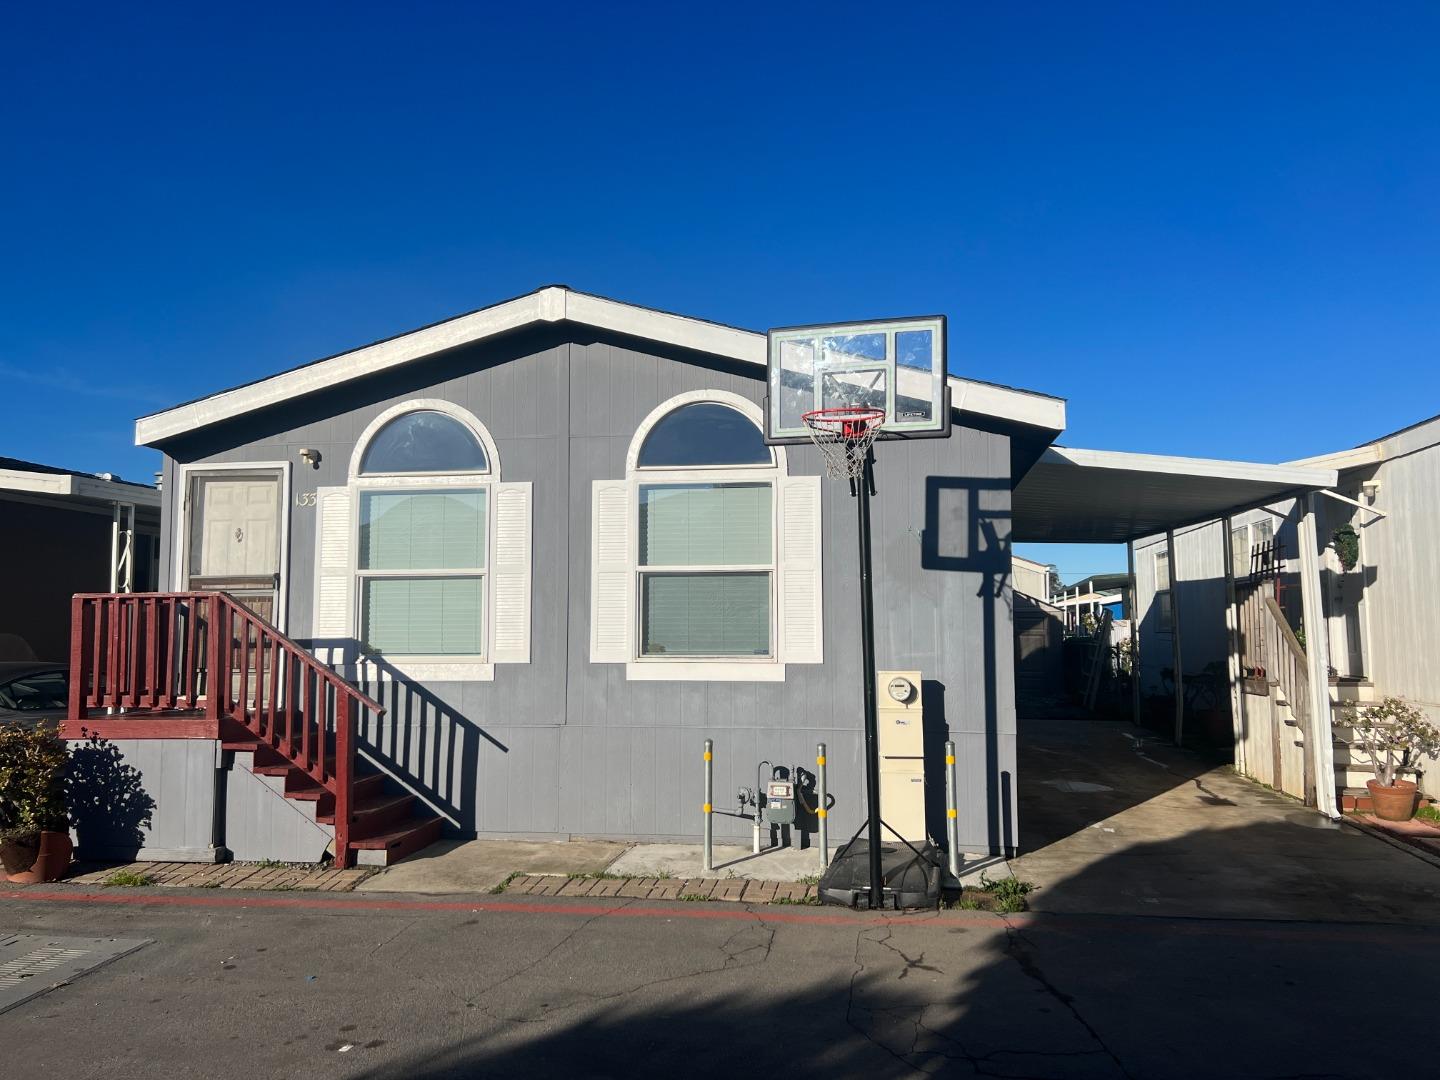 Photo of 20 Russell Rd #133 in Salinas, CA